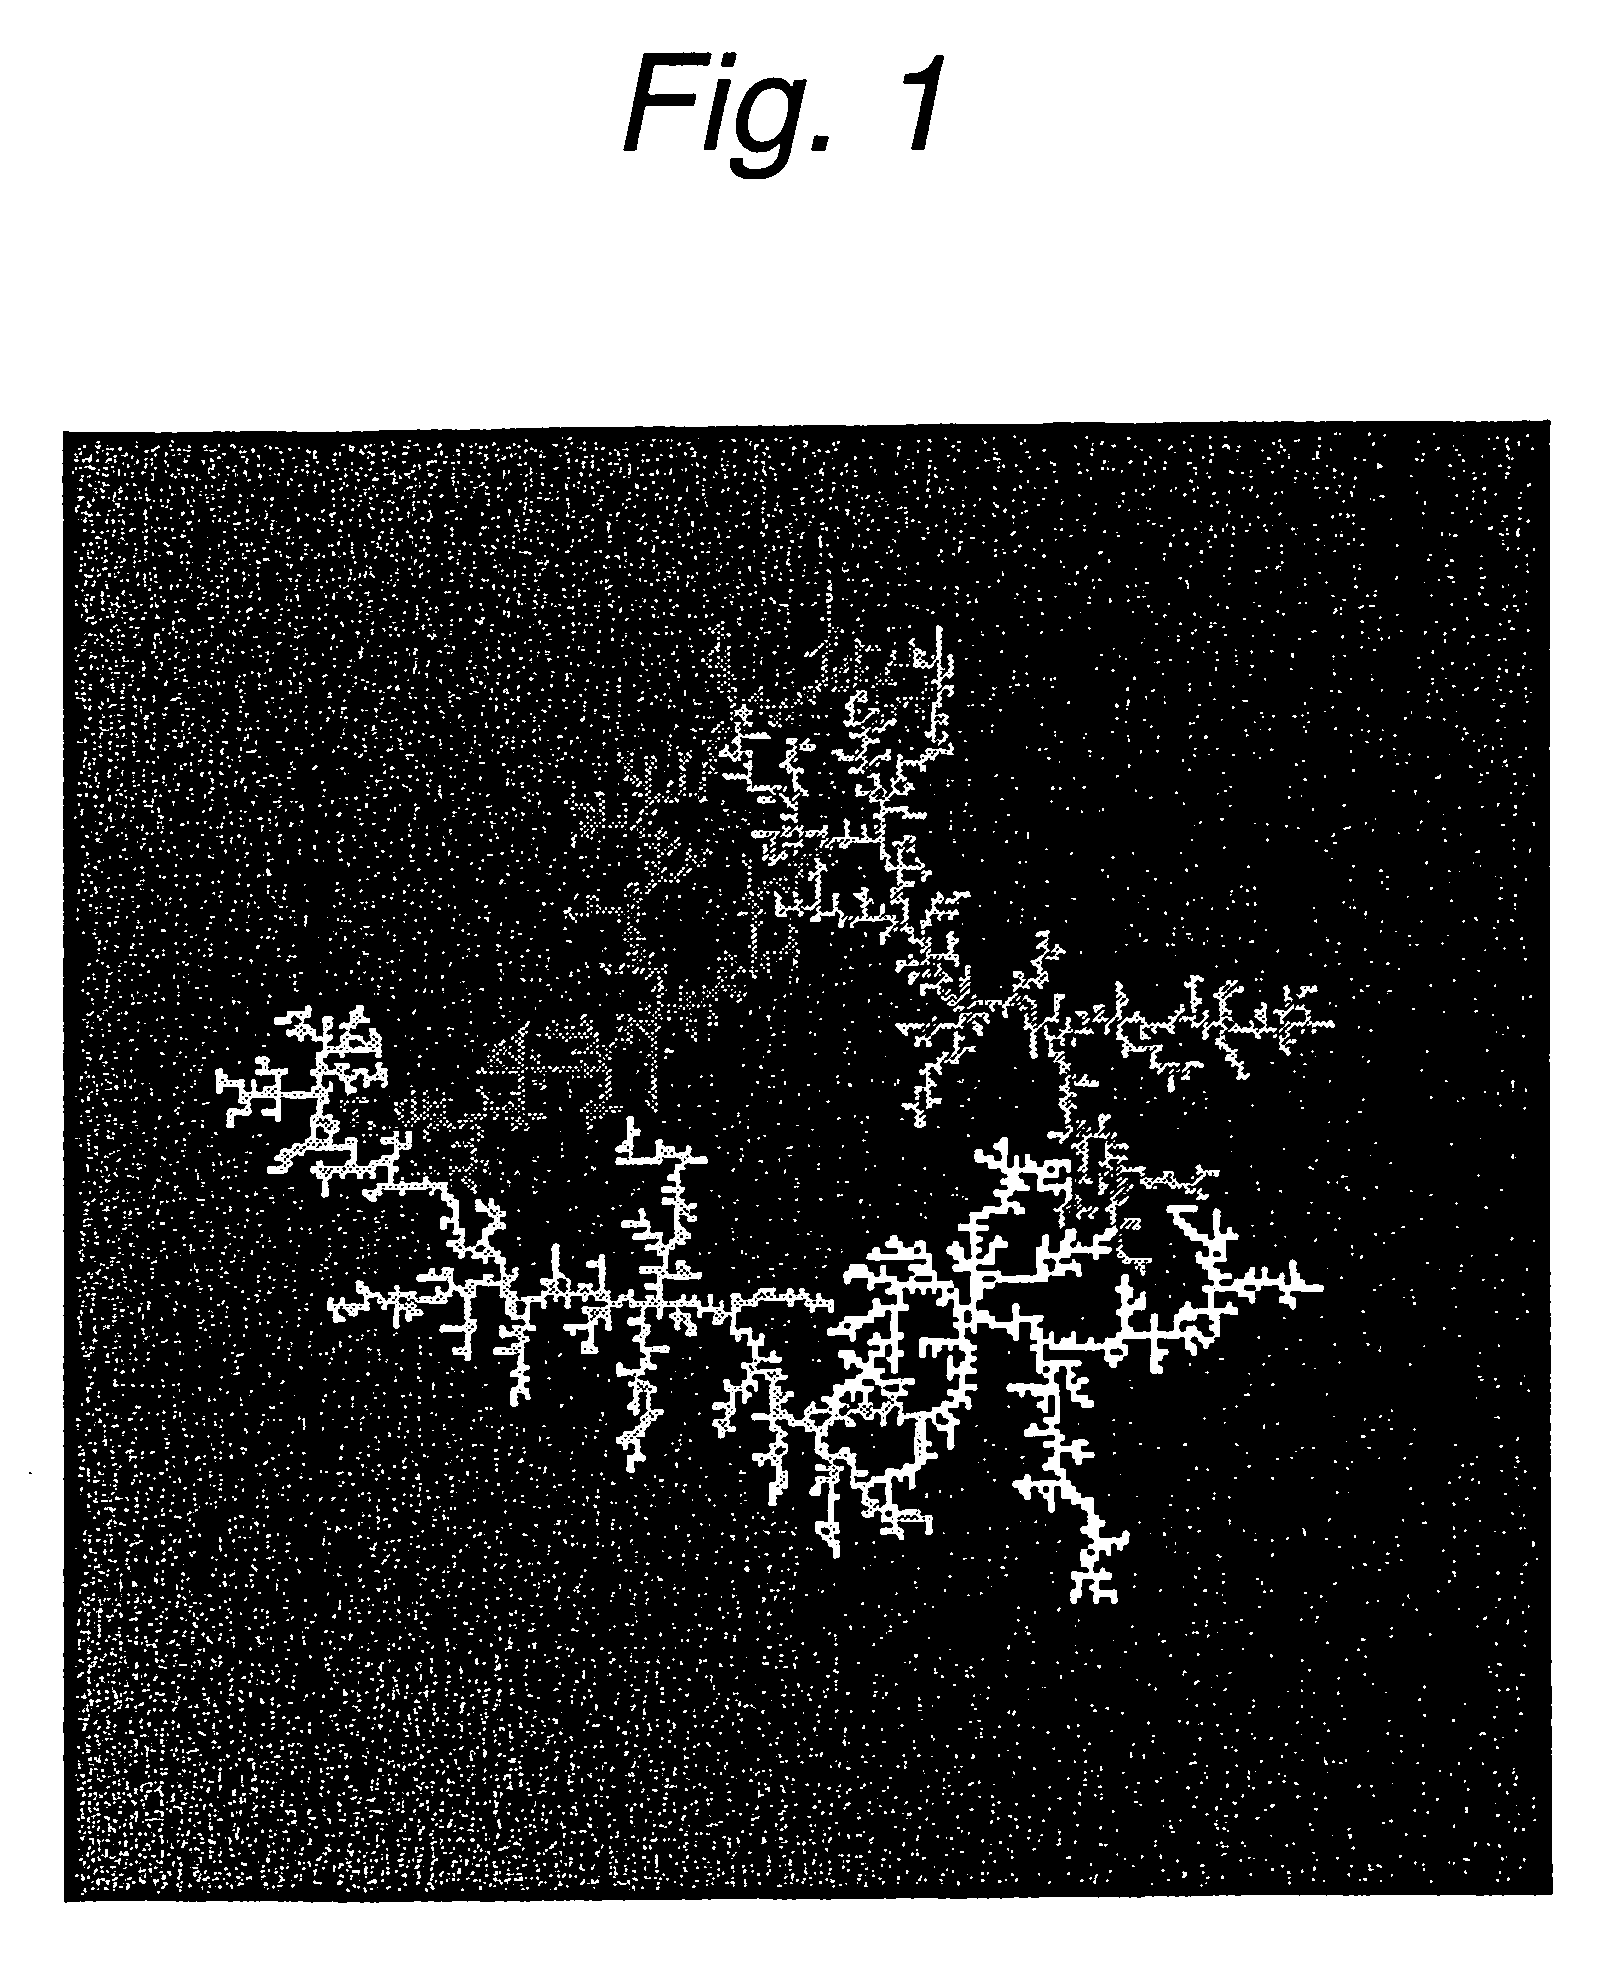 Method of fabricating a fractal structure for constructing complex neural networks